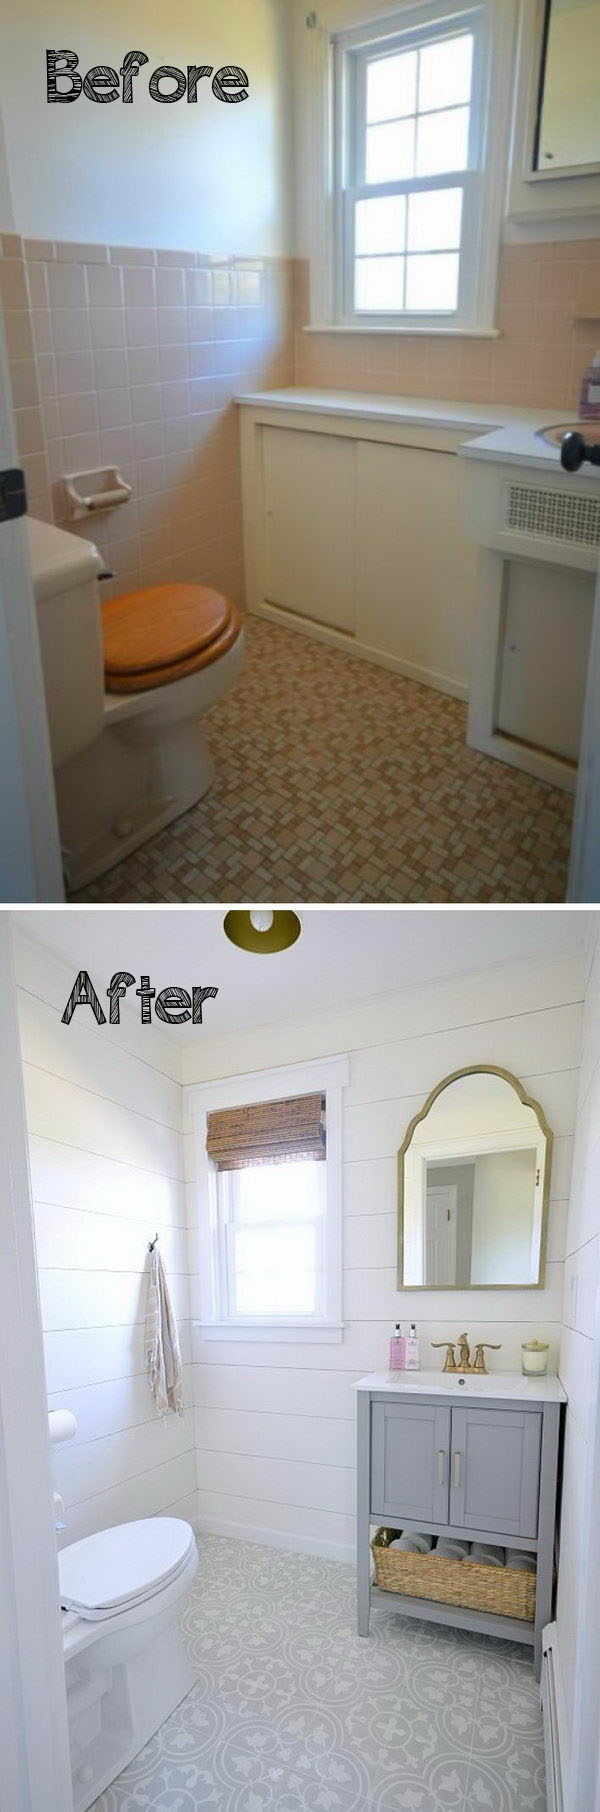 Make the bold patterned floor and gray vanity stand out with white shiplap walls that look clean. 